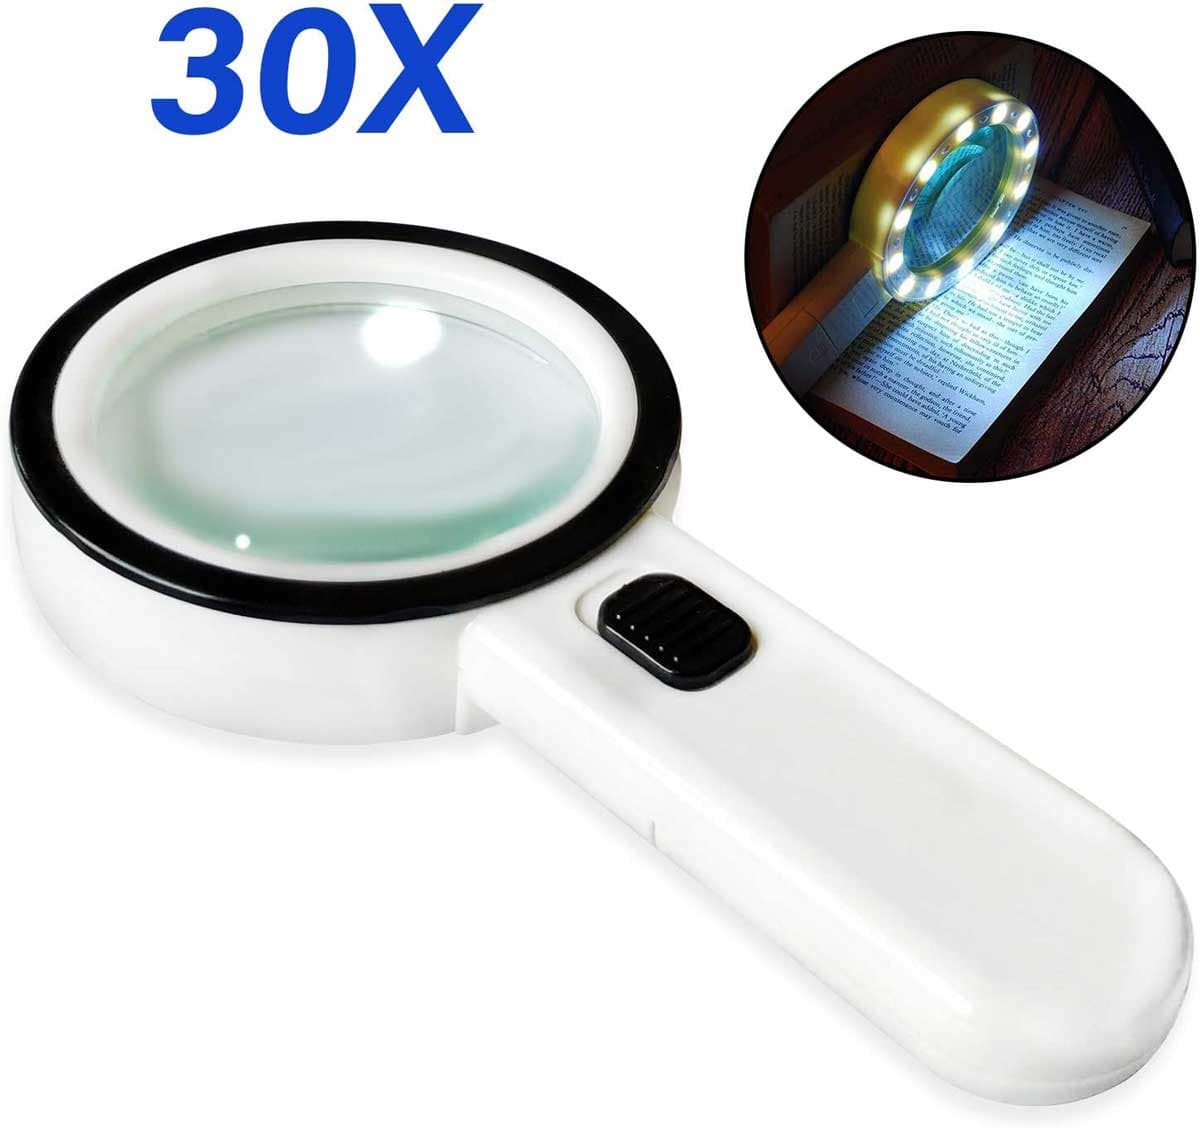 30x High Handheld Strong Magnifying Glass With 12 Led Light,best